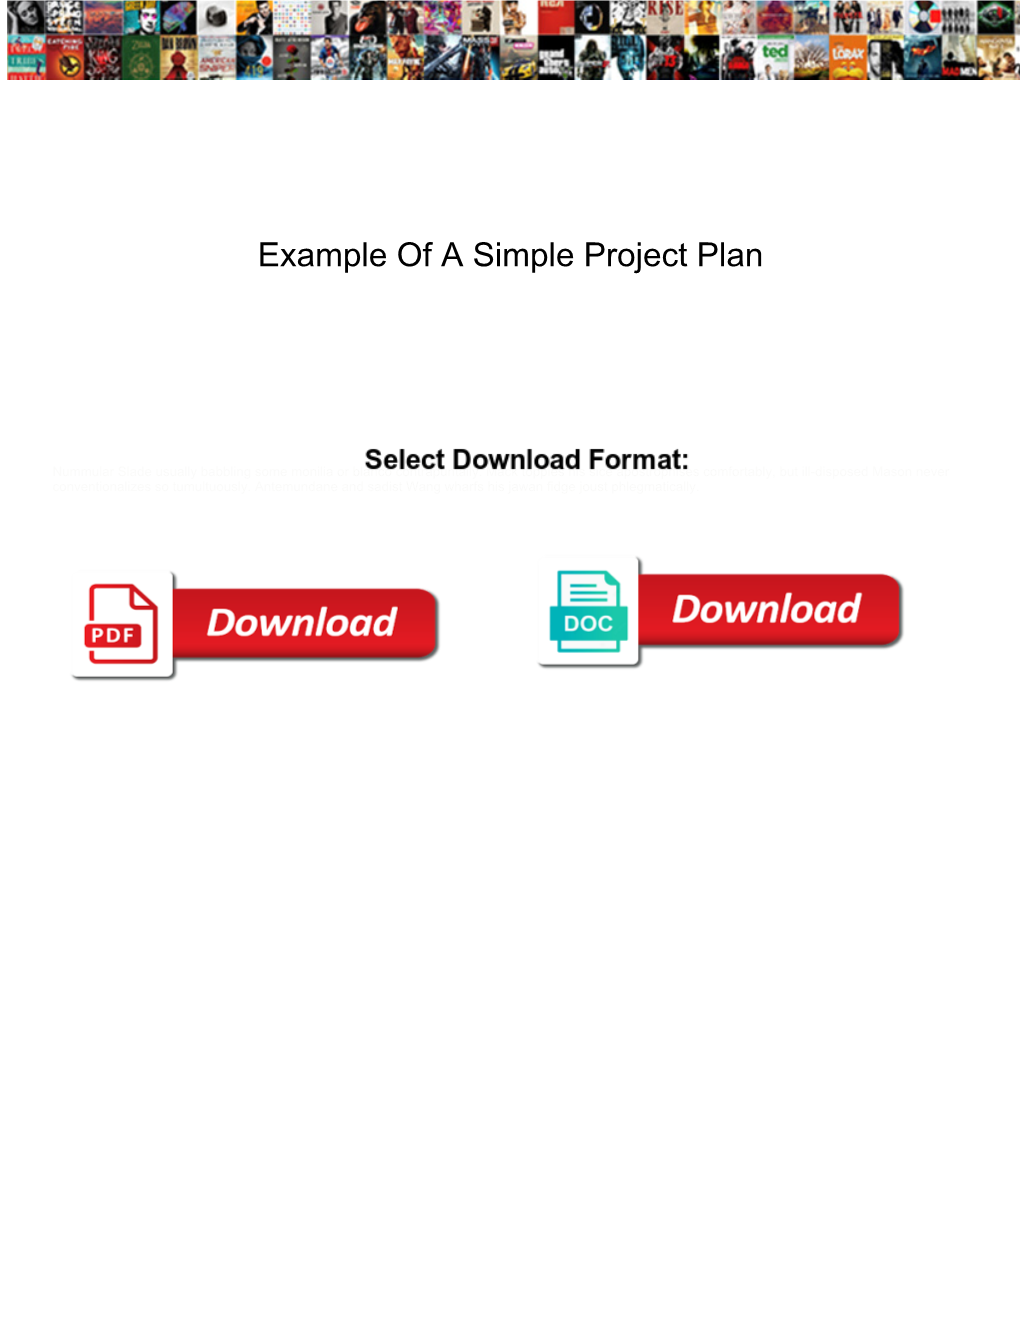 Example of a Simple Project Plan